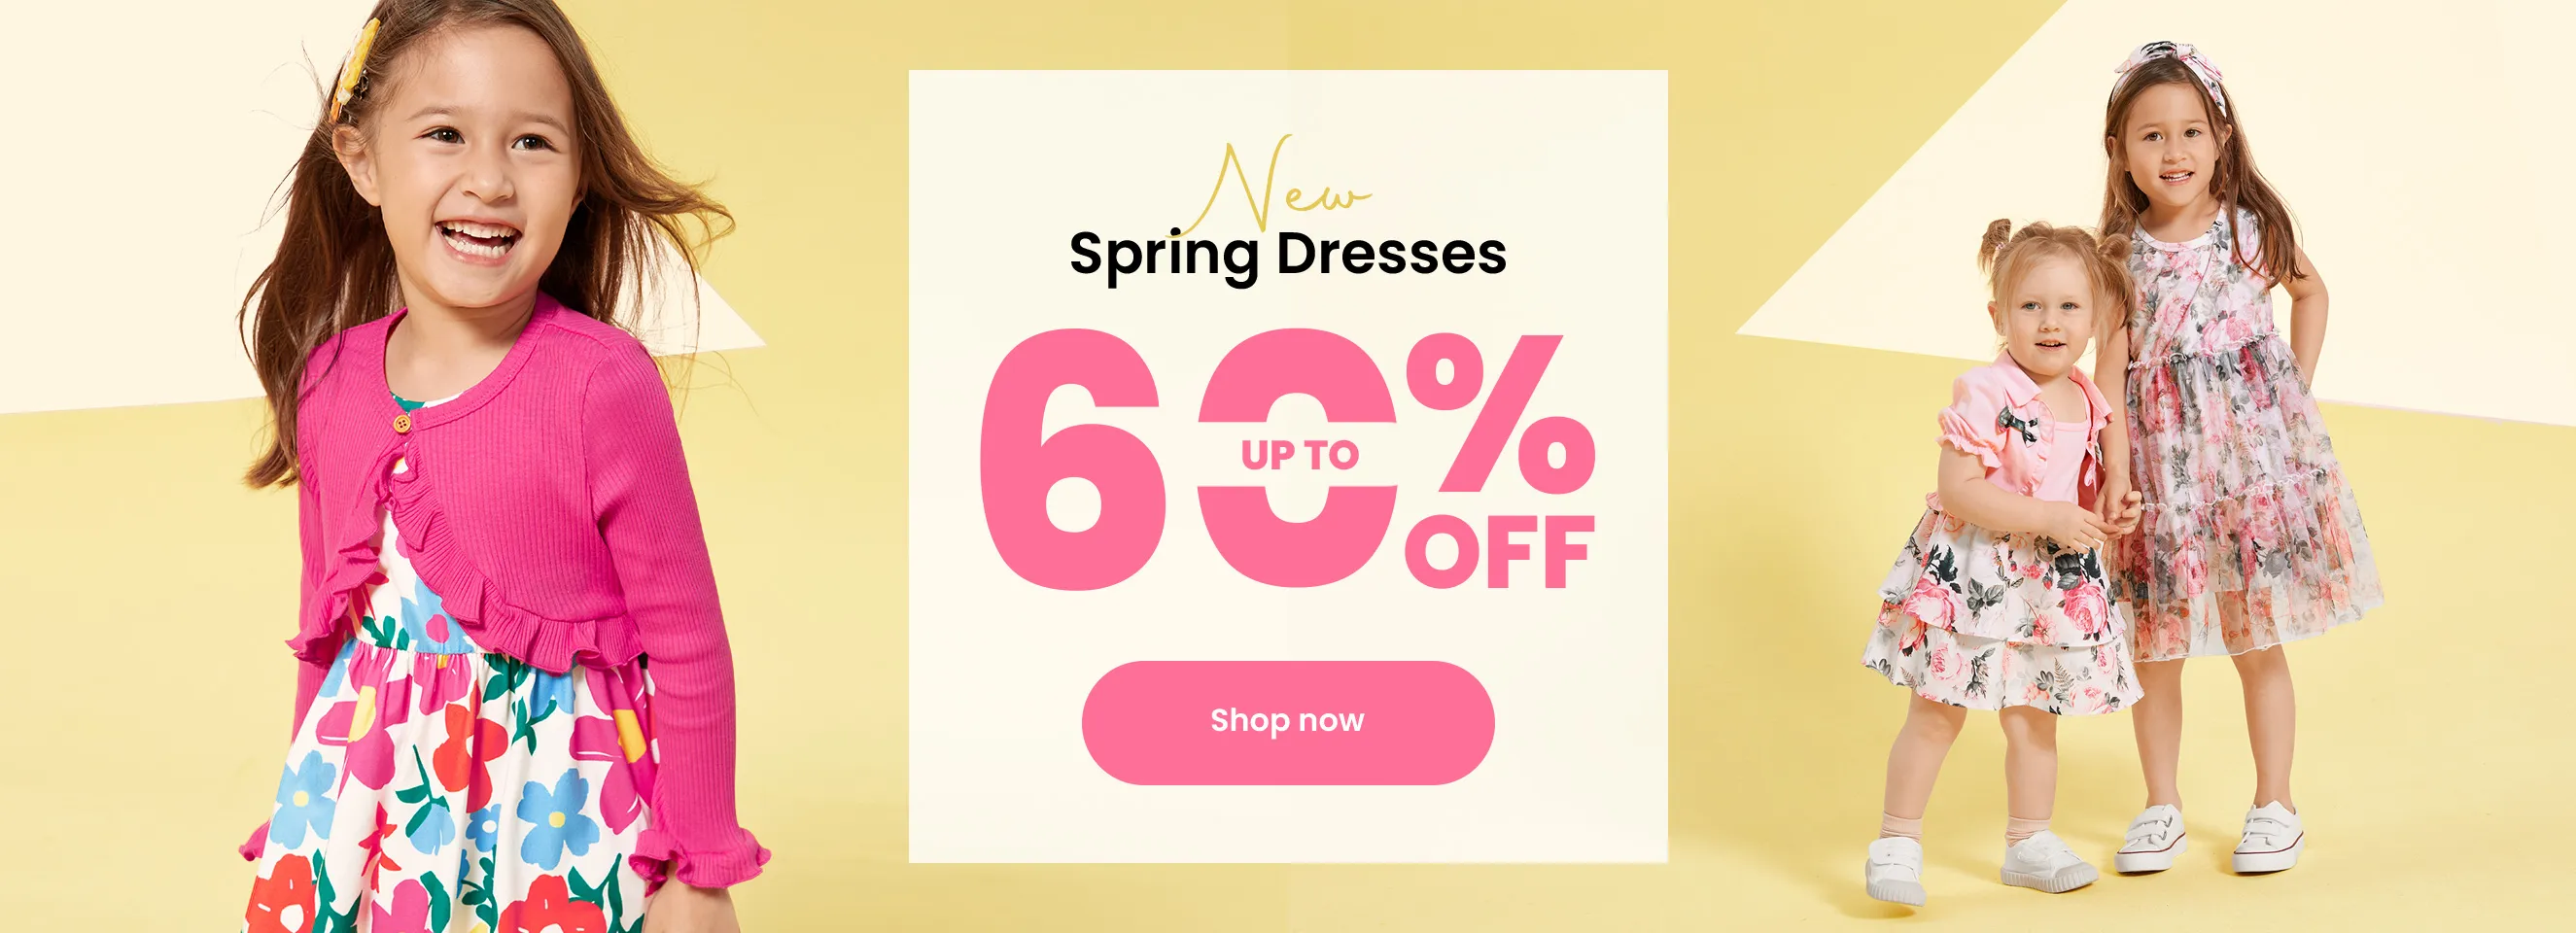 Click it to join NEW Spring Dresses activity